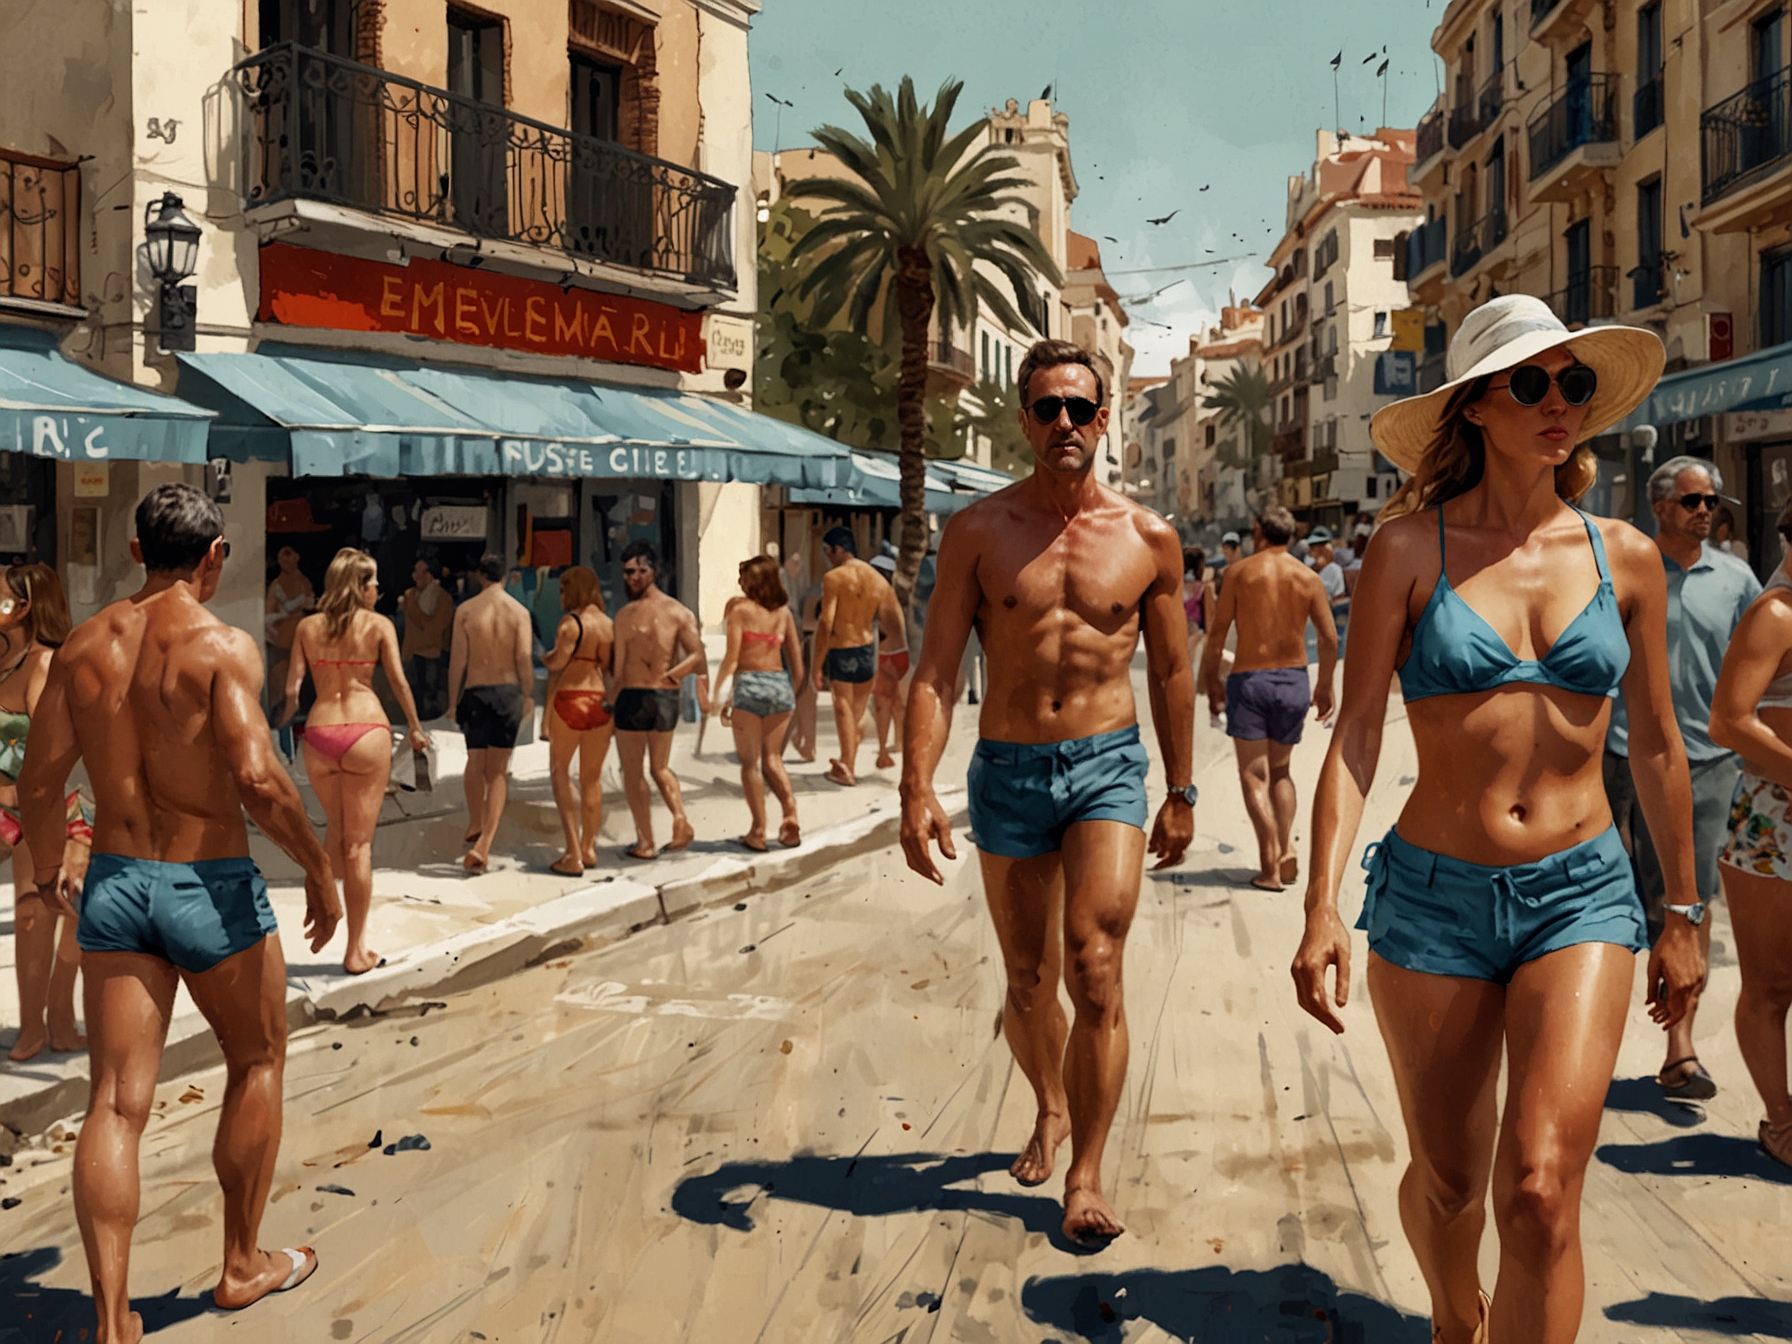 Beachgoers in Spain being warned about the prohibition of walking in swimwear in public streets, highlighting the need to maintain public decorum.